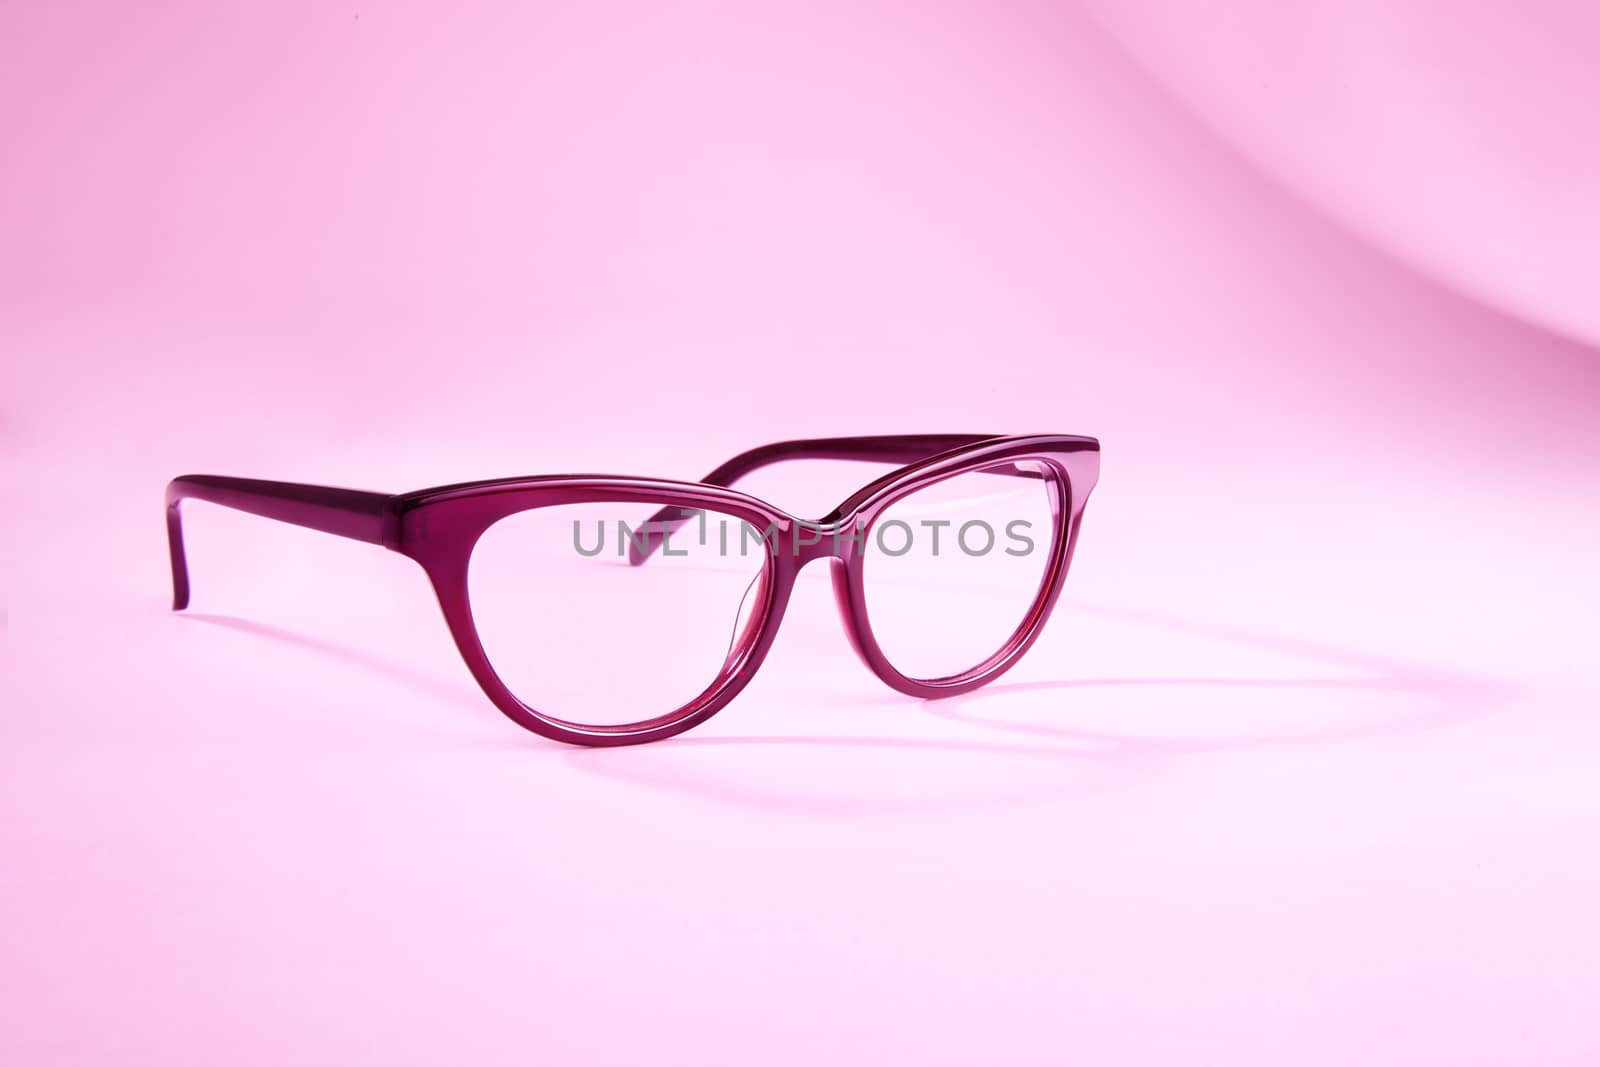 Advertising studio shot of pink glasses with long shadow at pink background.